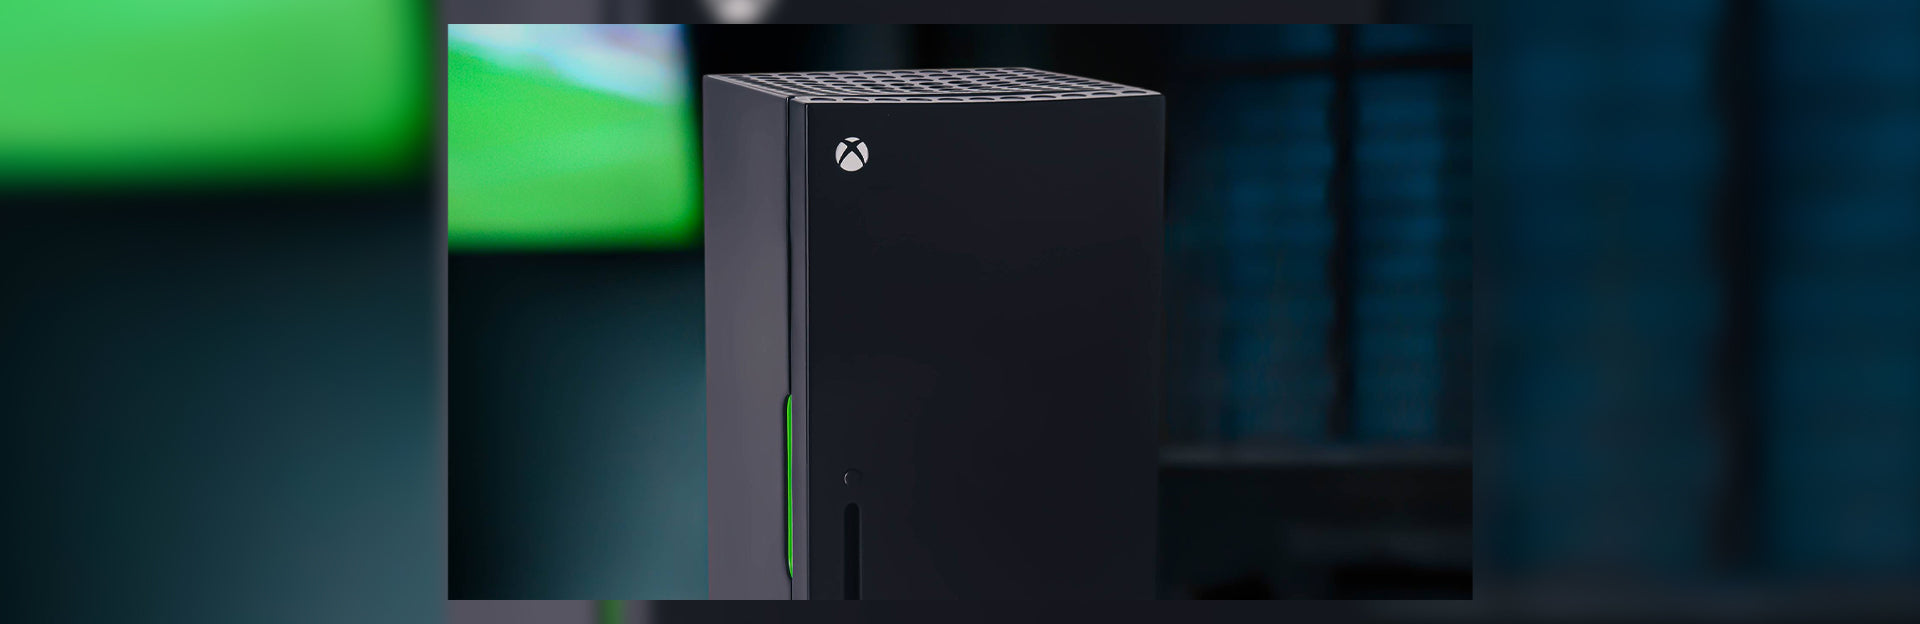 Xbox Series S specs: how powerful is Microsoft's pint-sized